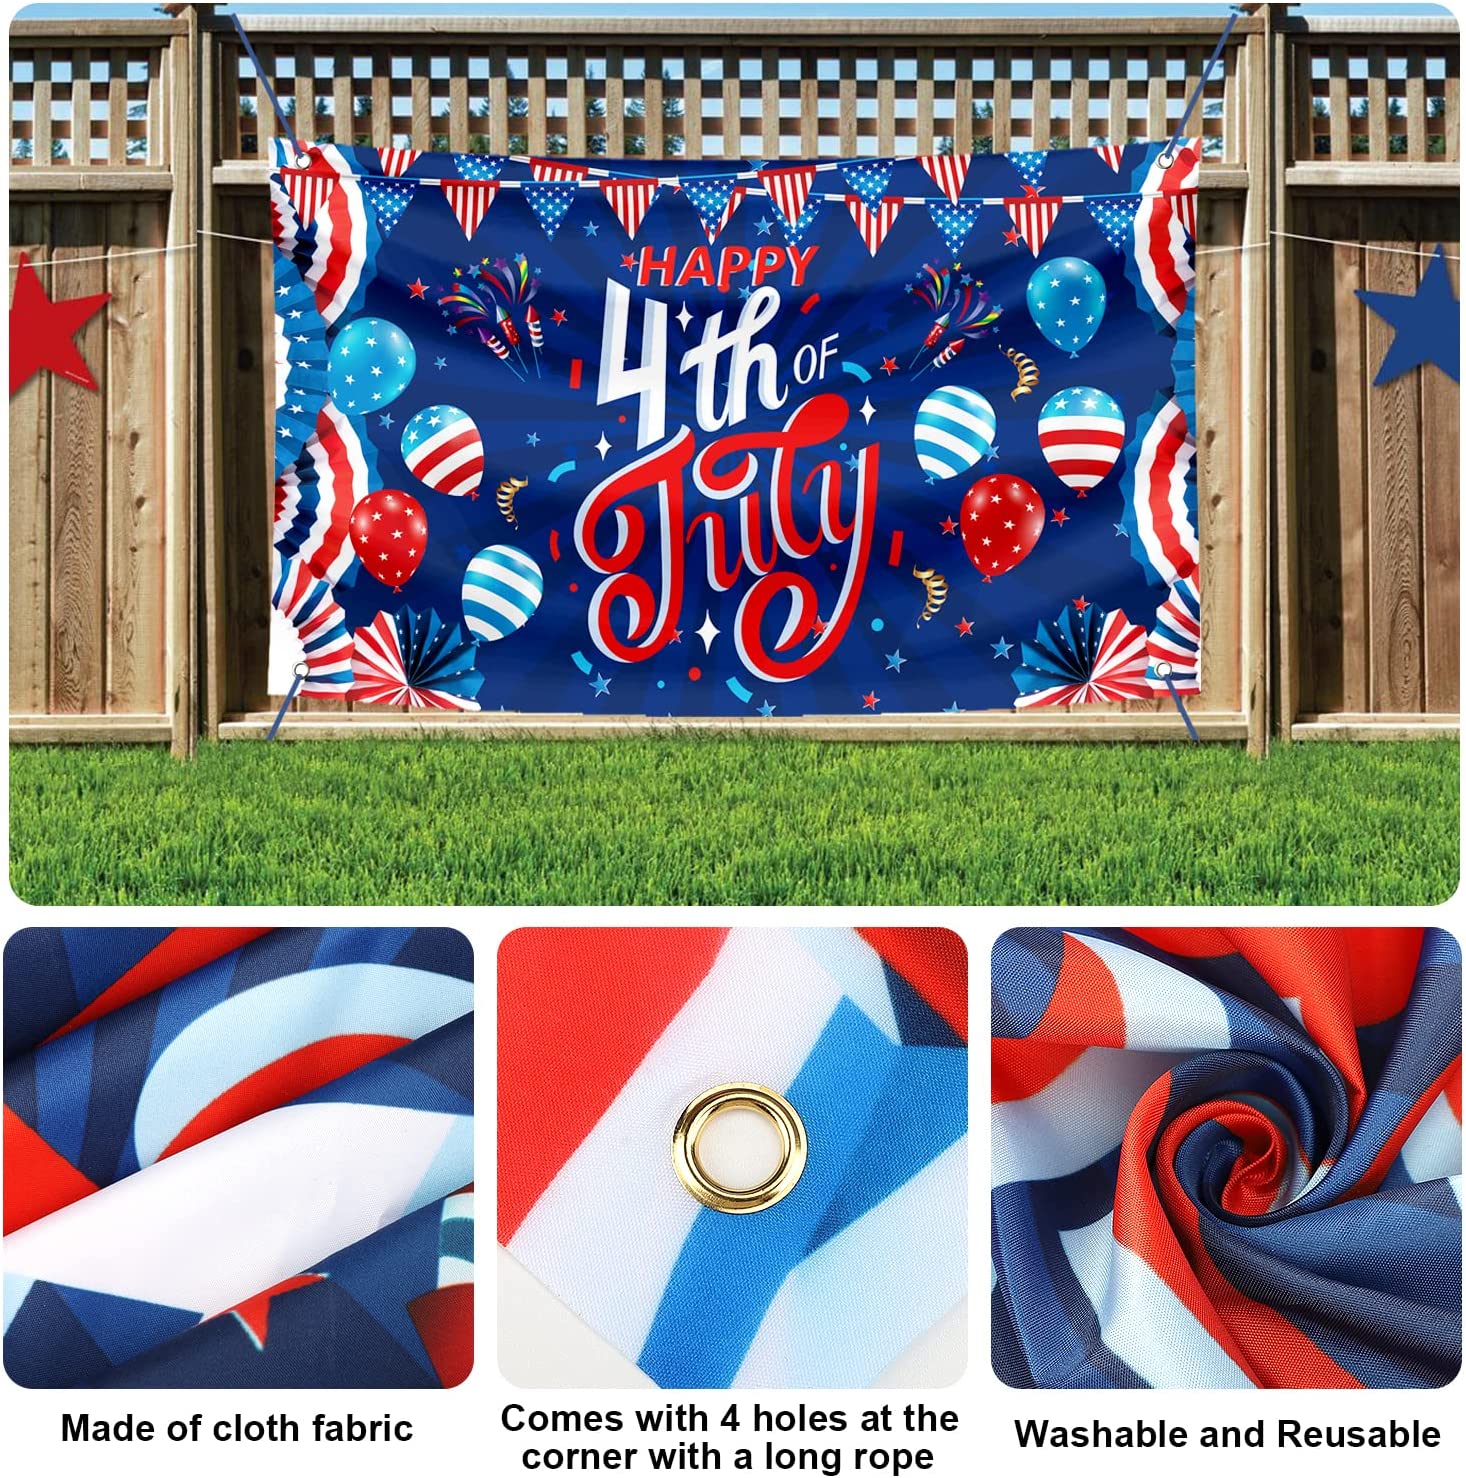 Large 4th of July Flag Decorations Outdoor Independence Day 71x44 Inch